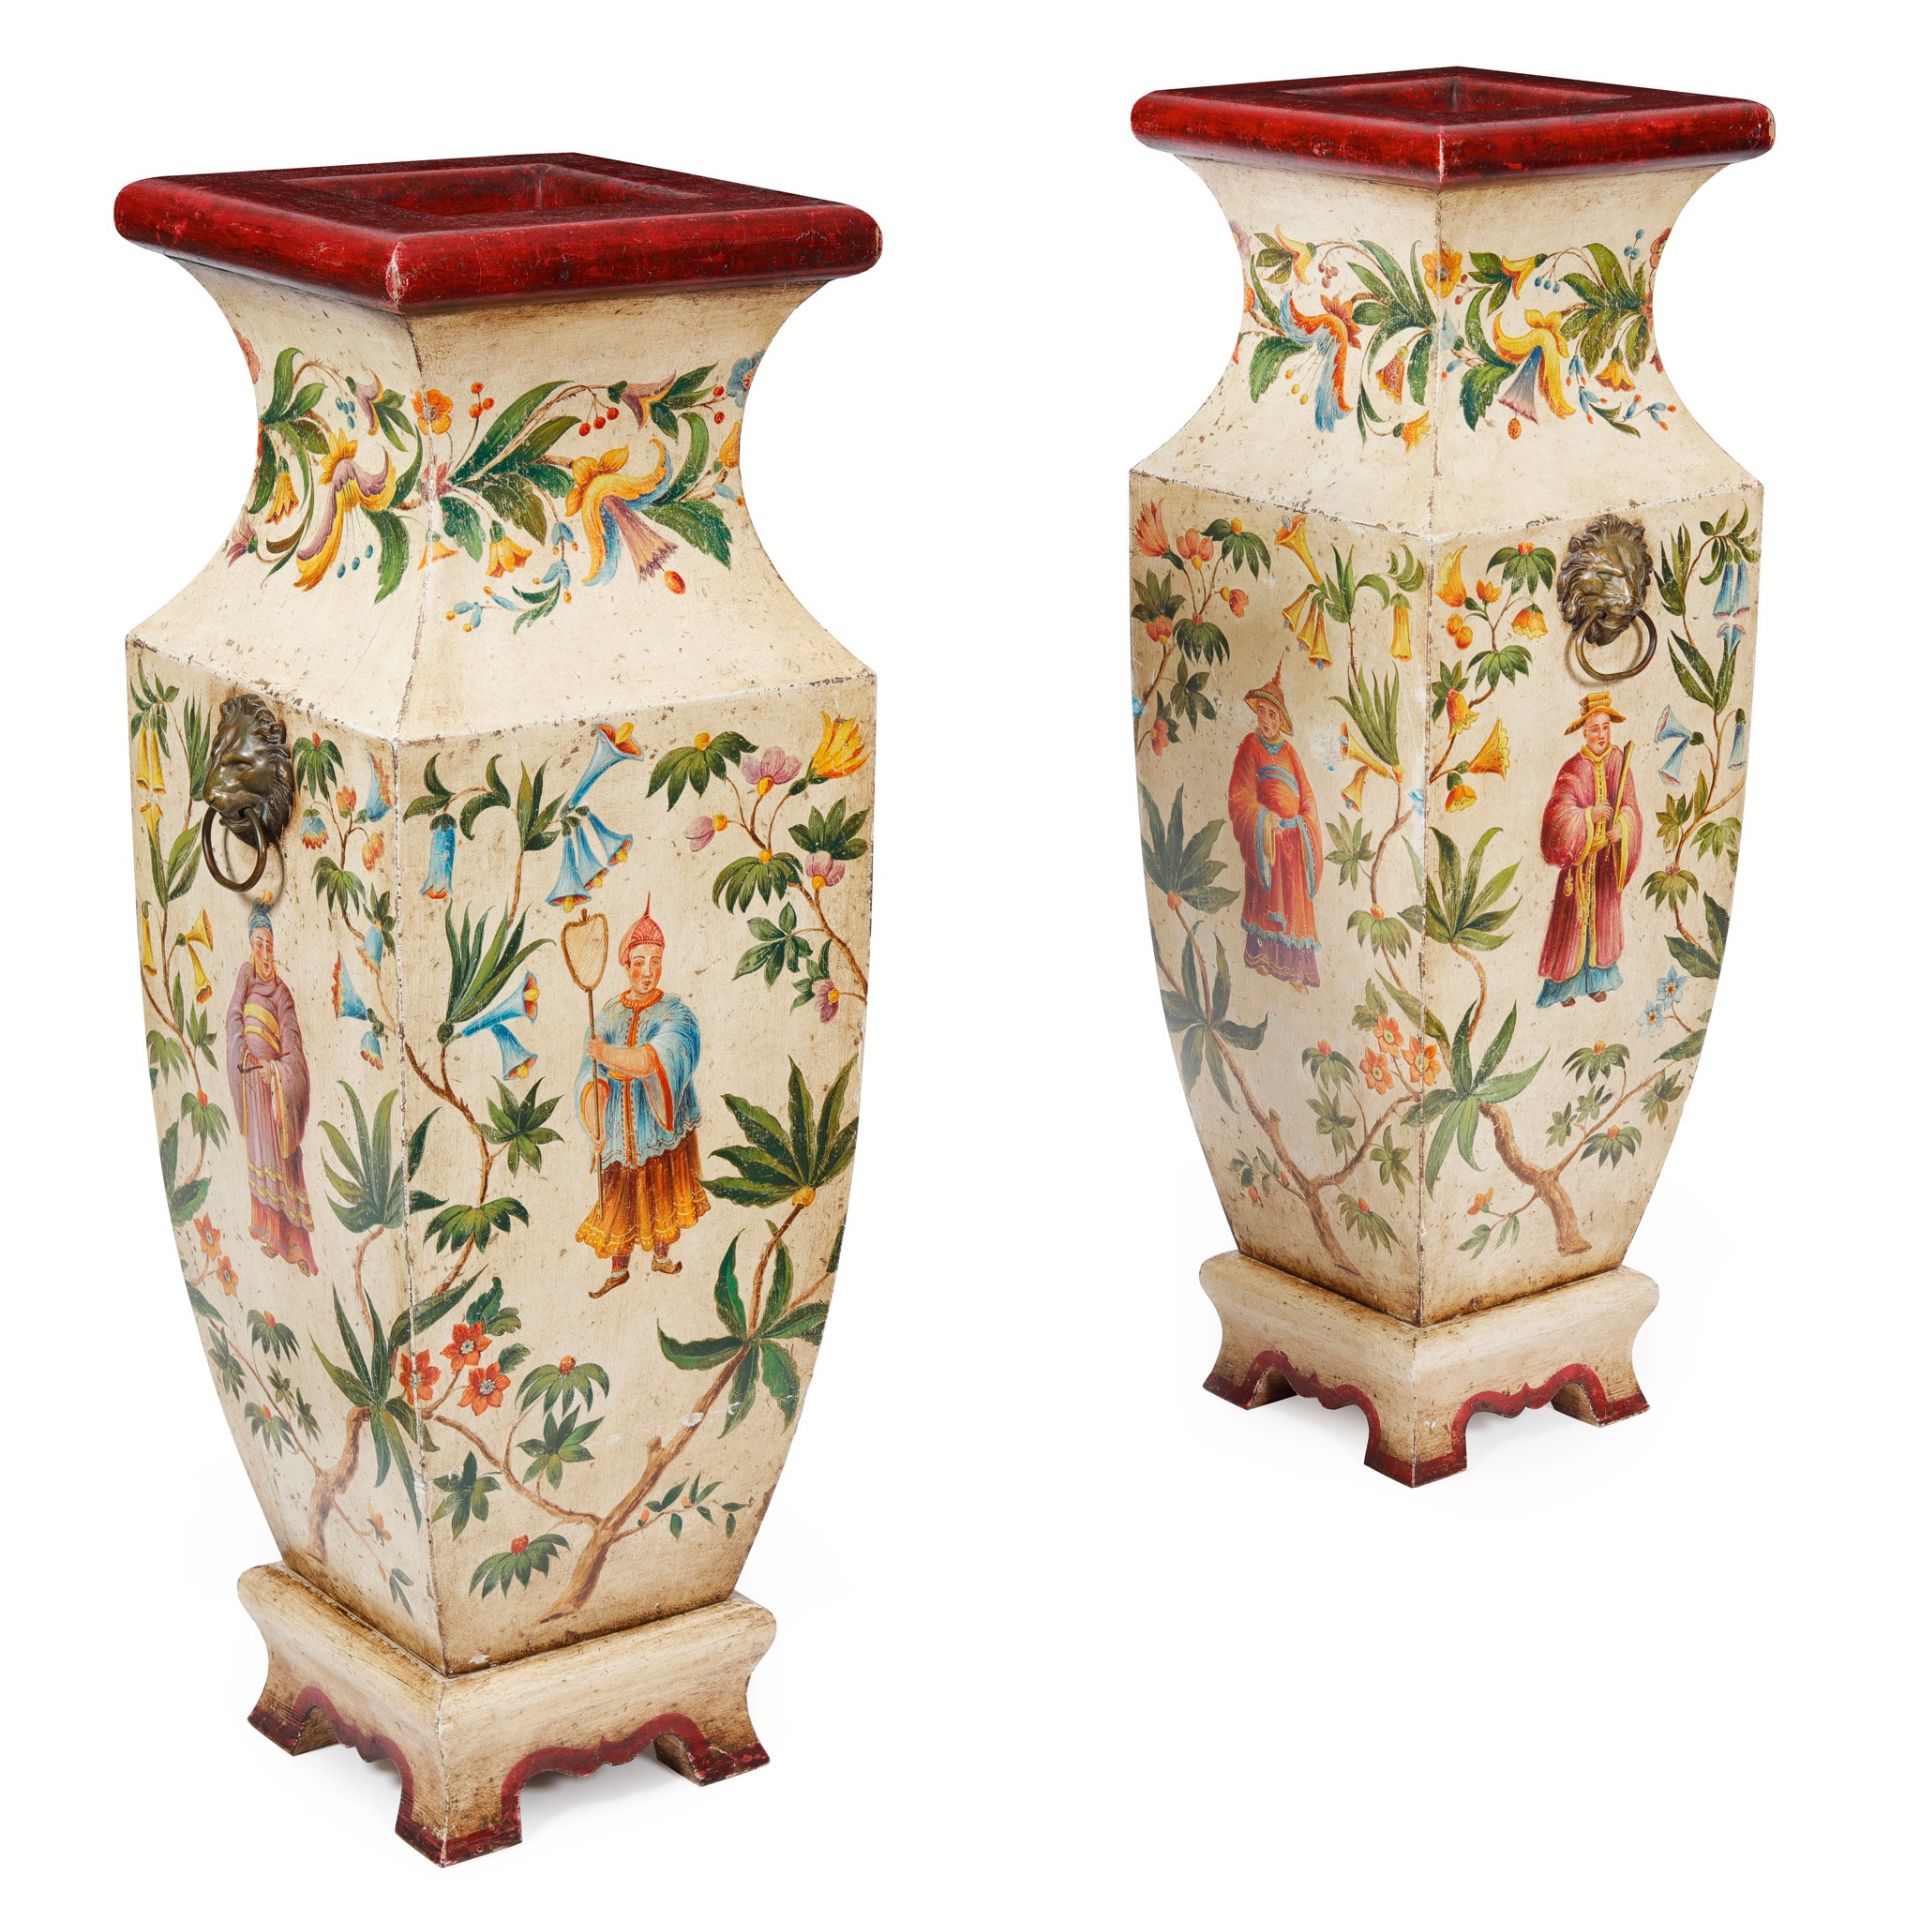 PAIR OF TOLE PAINTED SQUARED VASES LATE 19TH CENTURY